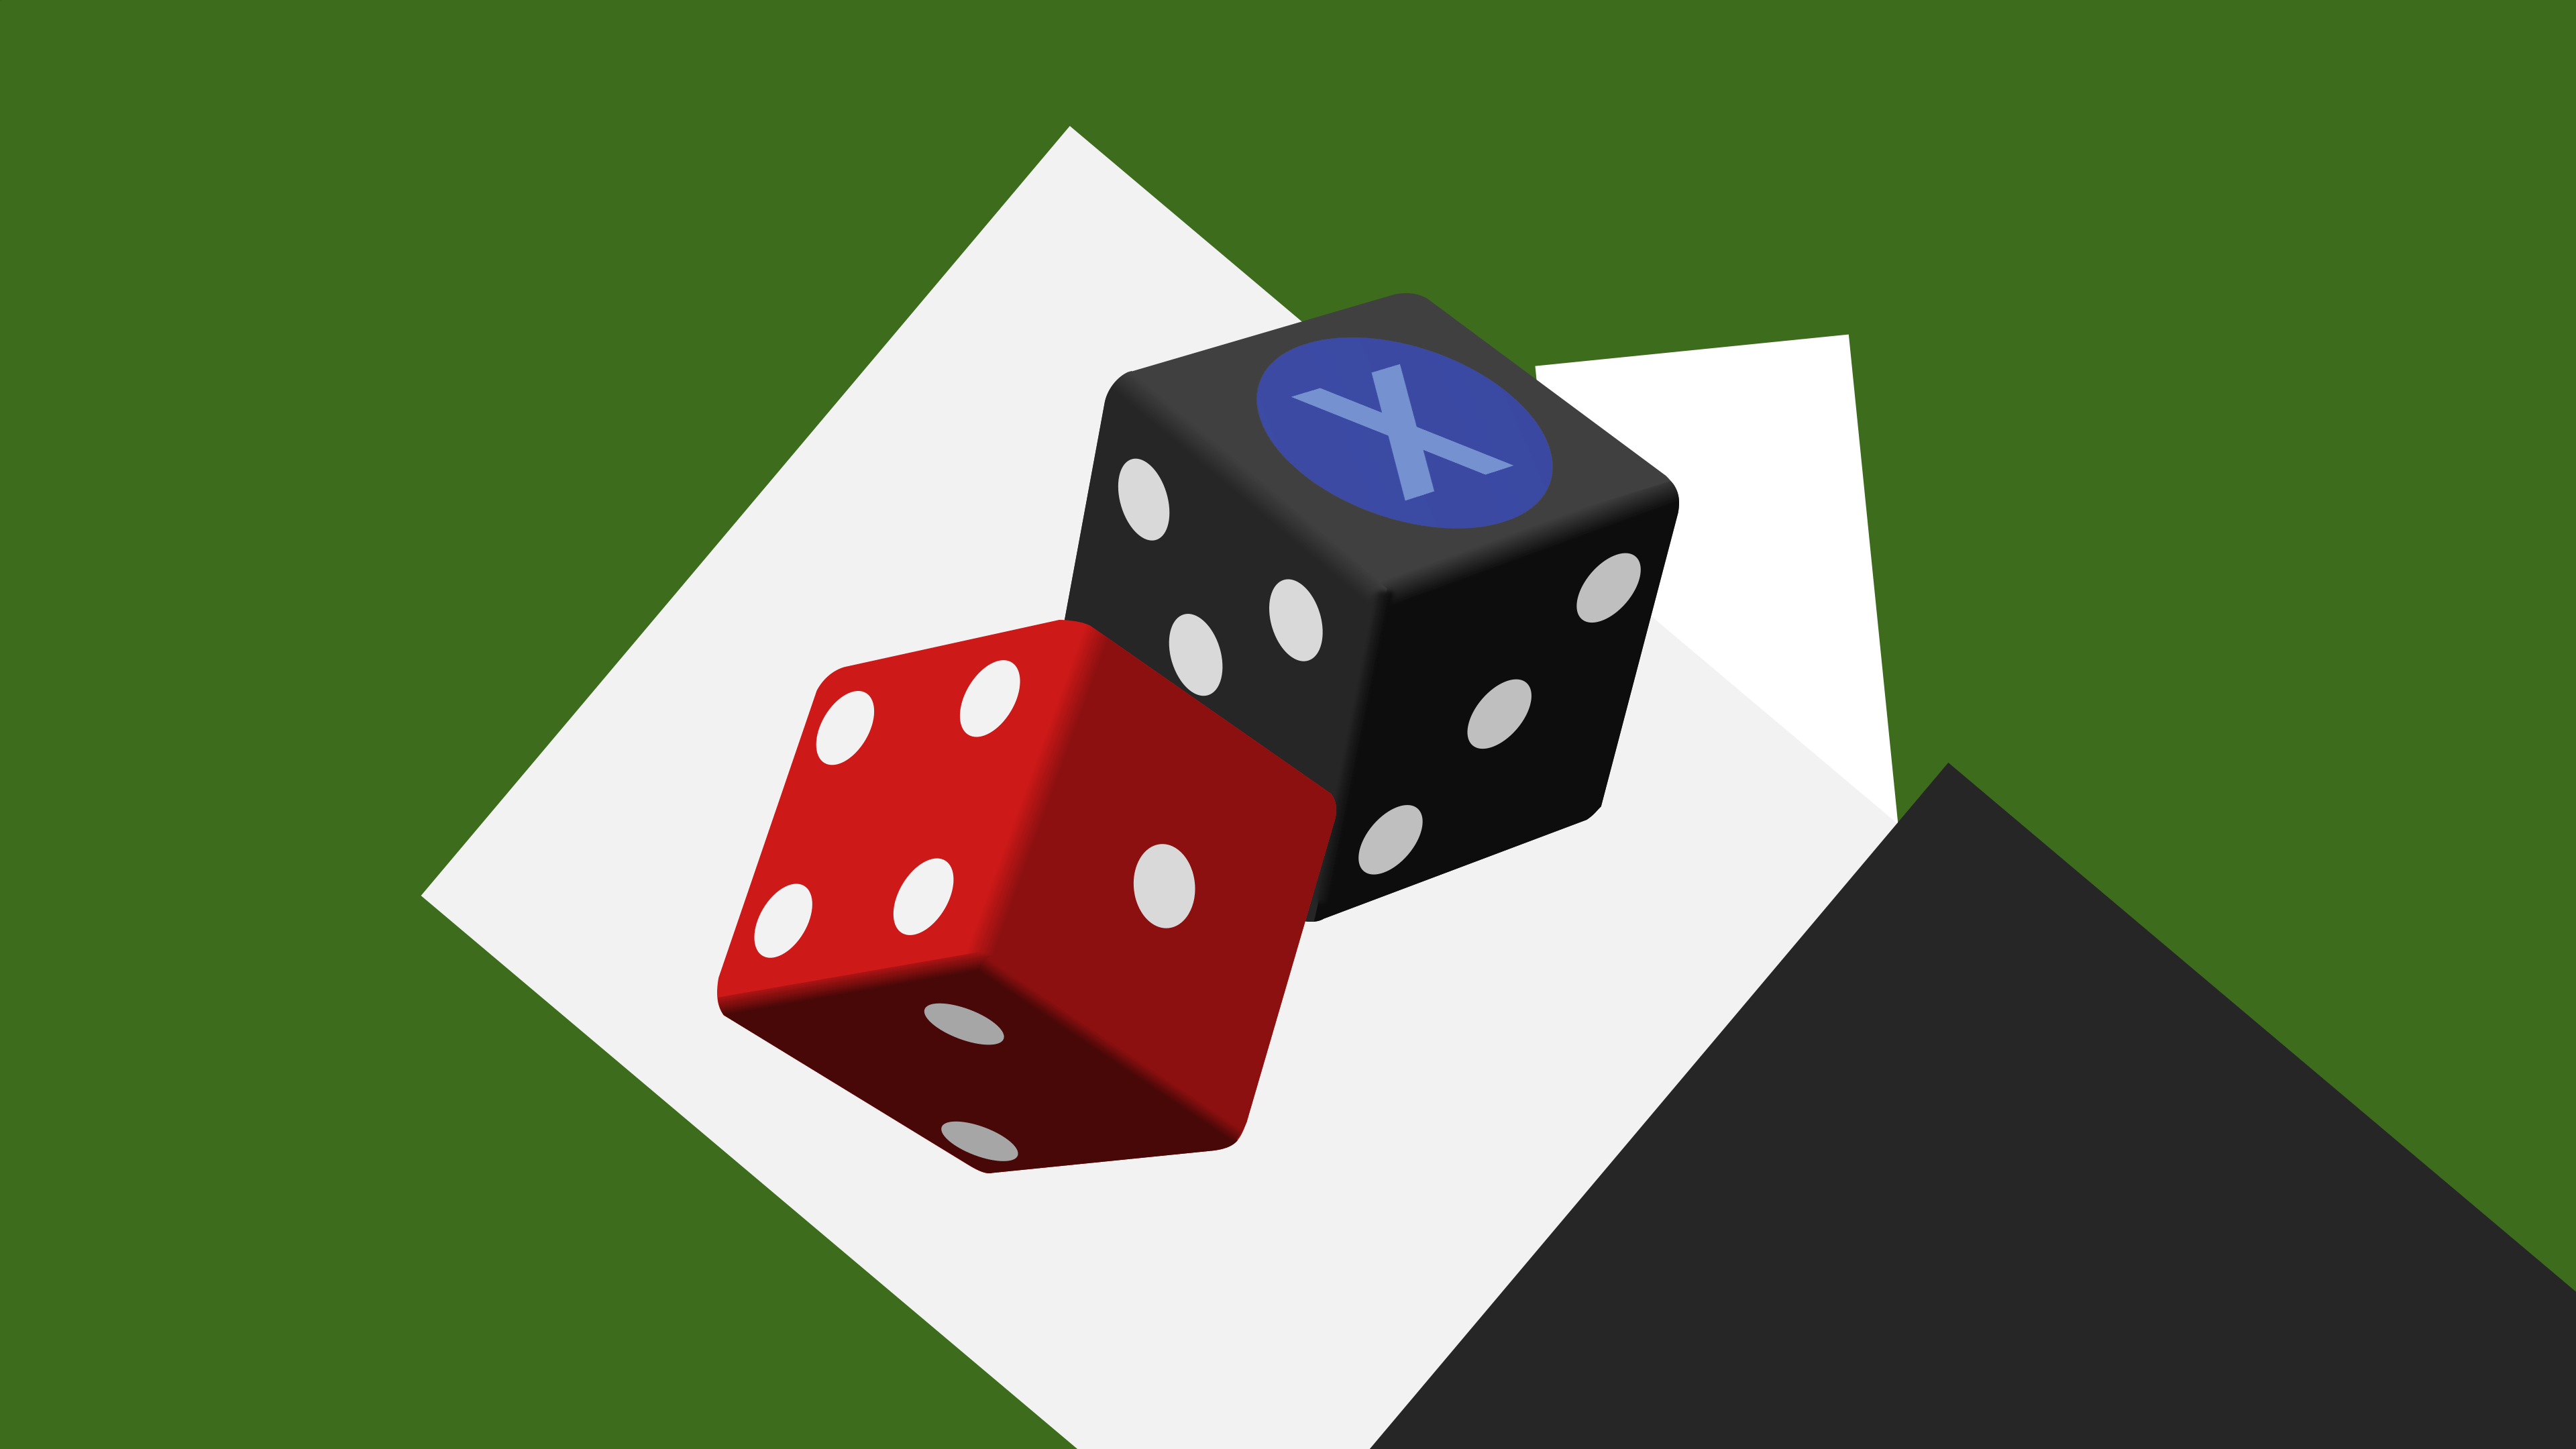 A hand with some dice. One die has an “X” on it, which is commonly associated with the “Doubt” action in L.A. Noire
